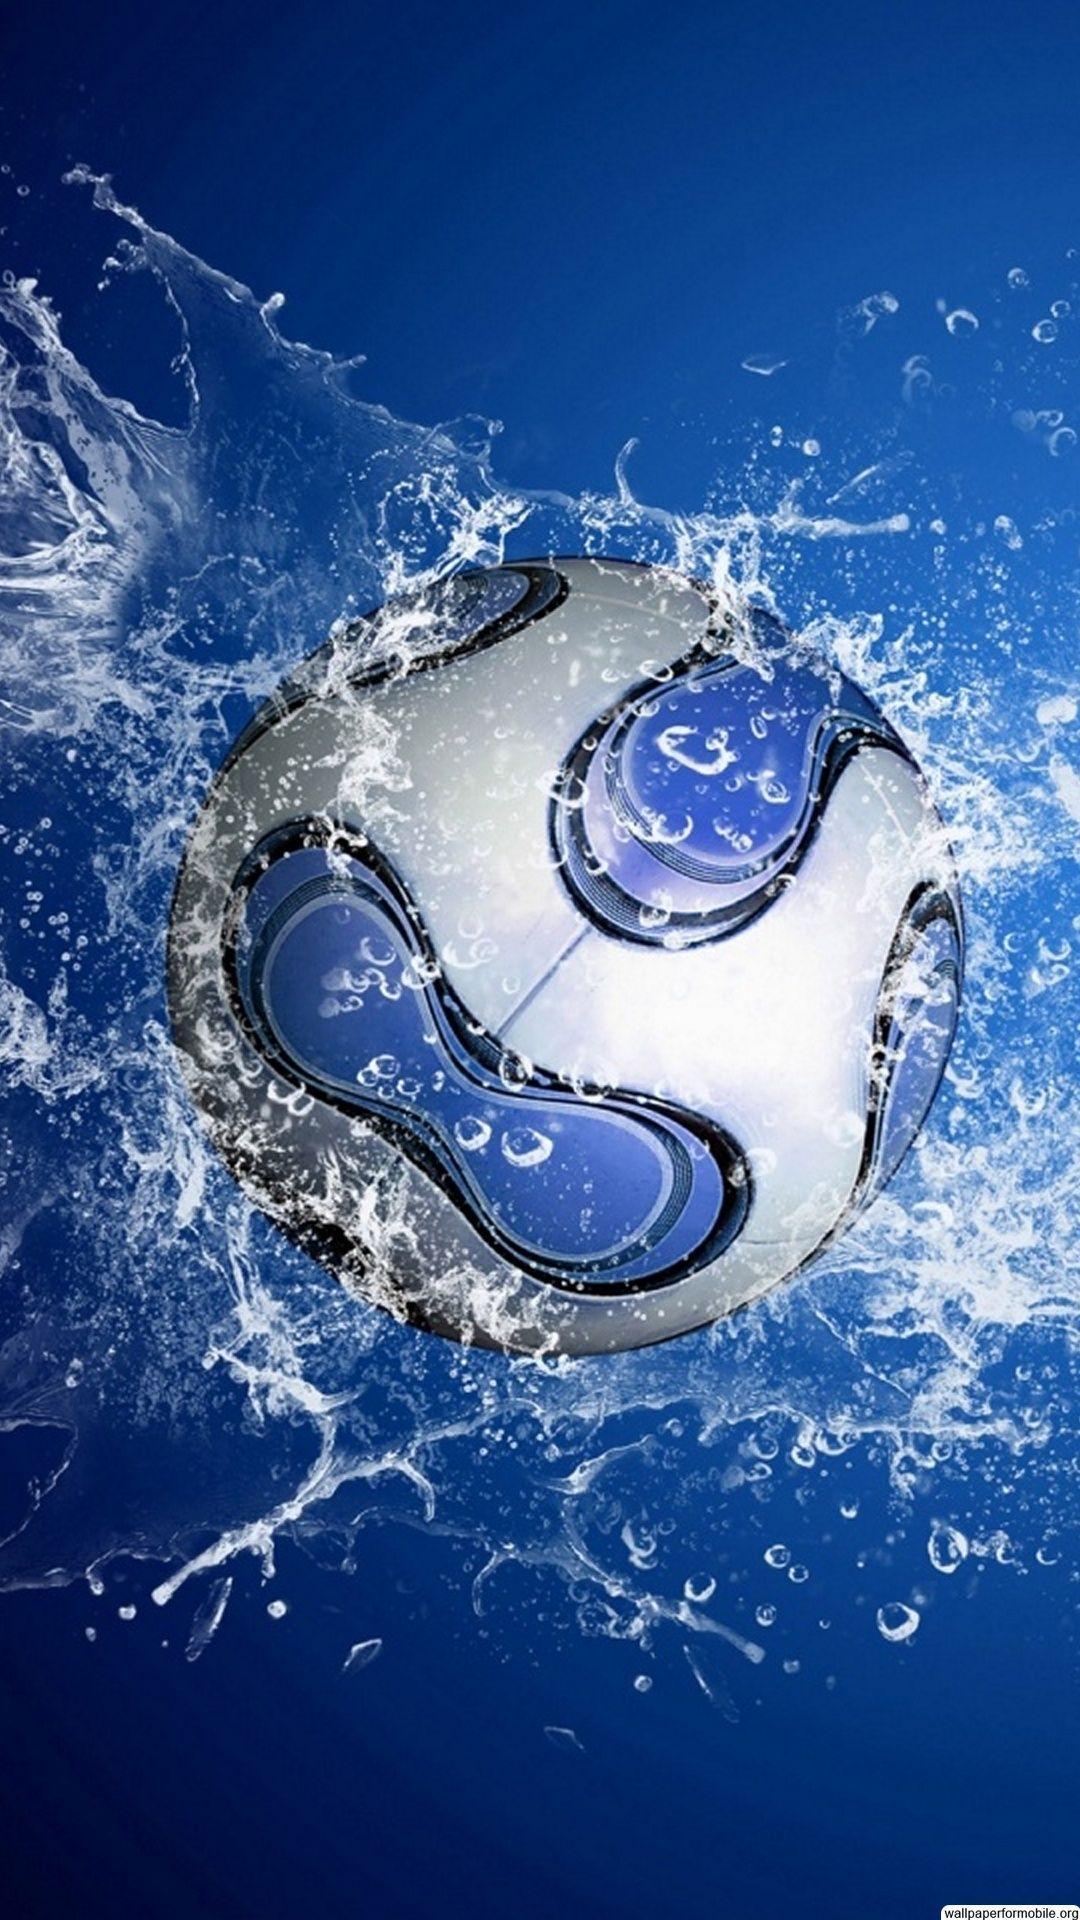 Free Football Wallpaper For iPhone for Mobile